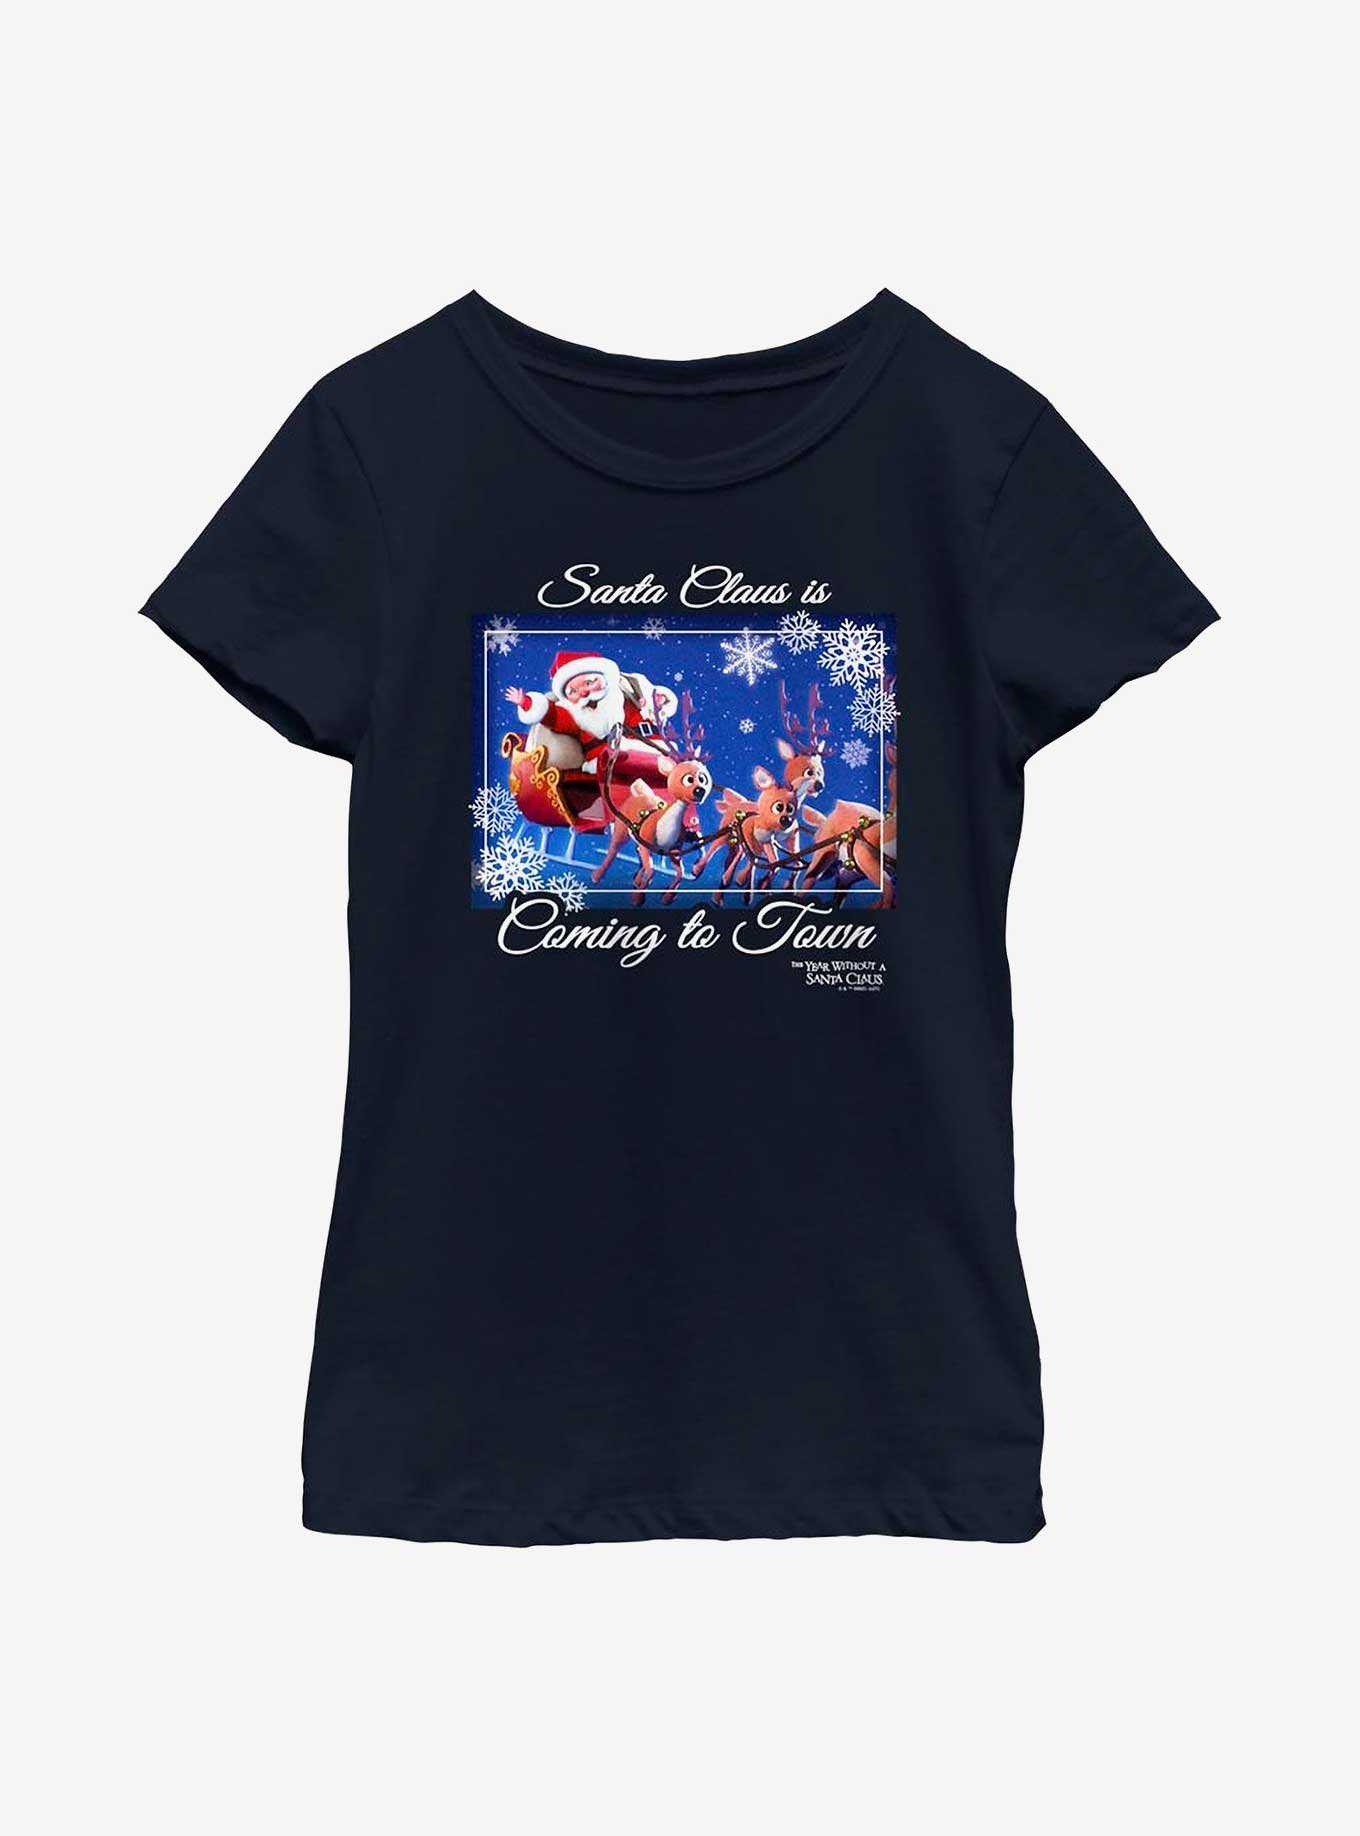 The Year Without Santa Claus Coming To Town Youth Girls T-Shirt, , hi-res